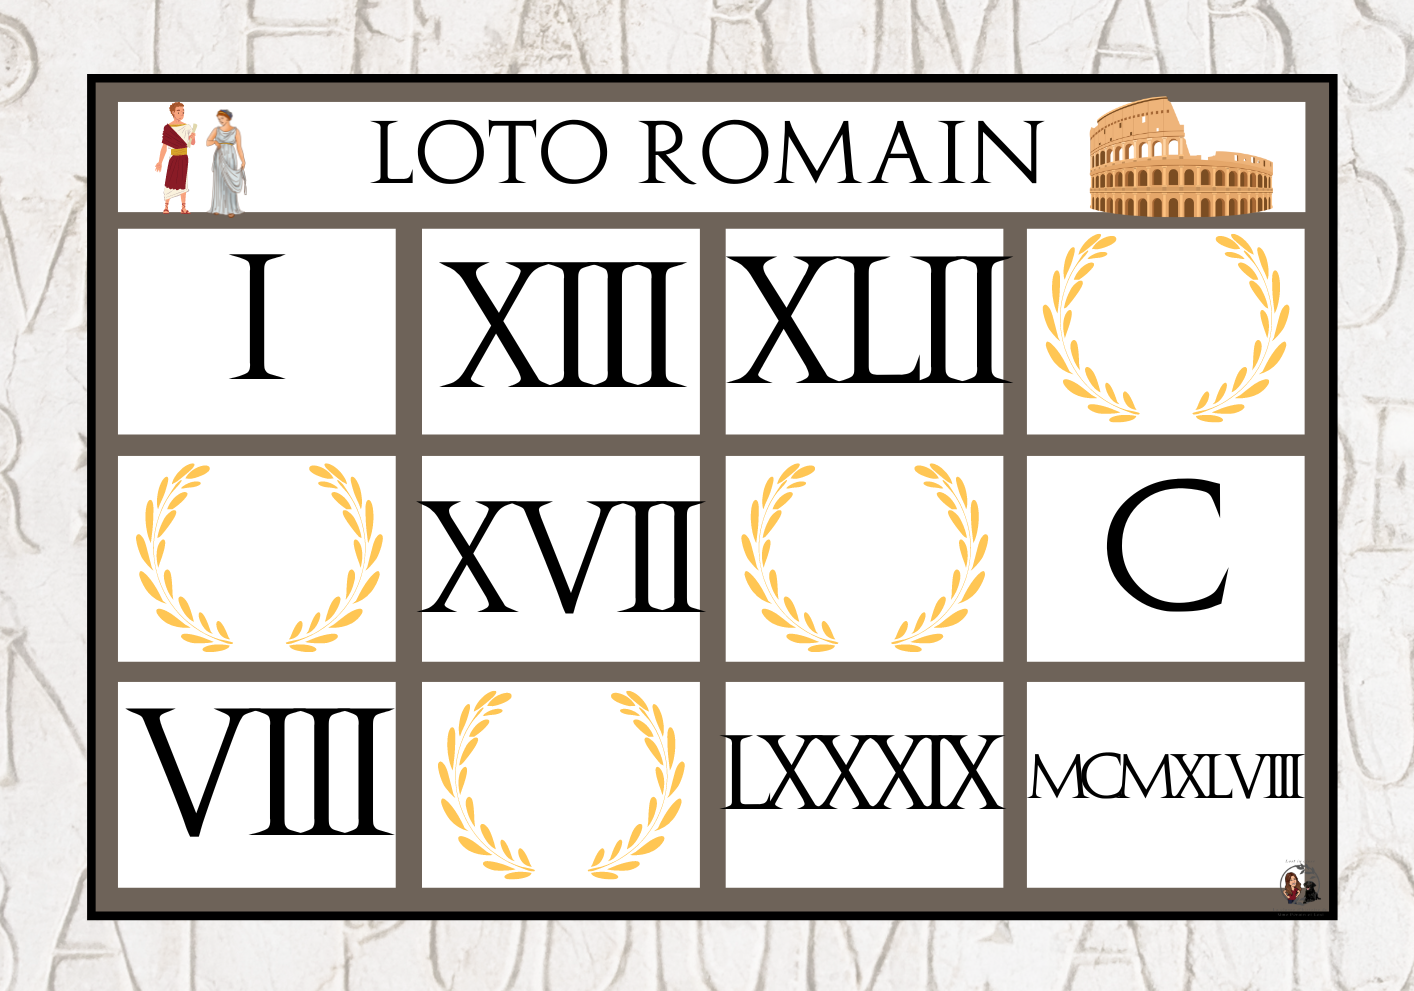 You are currently viewing Le loto romain